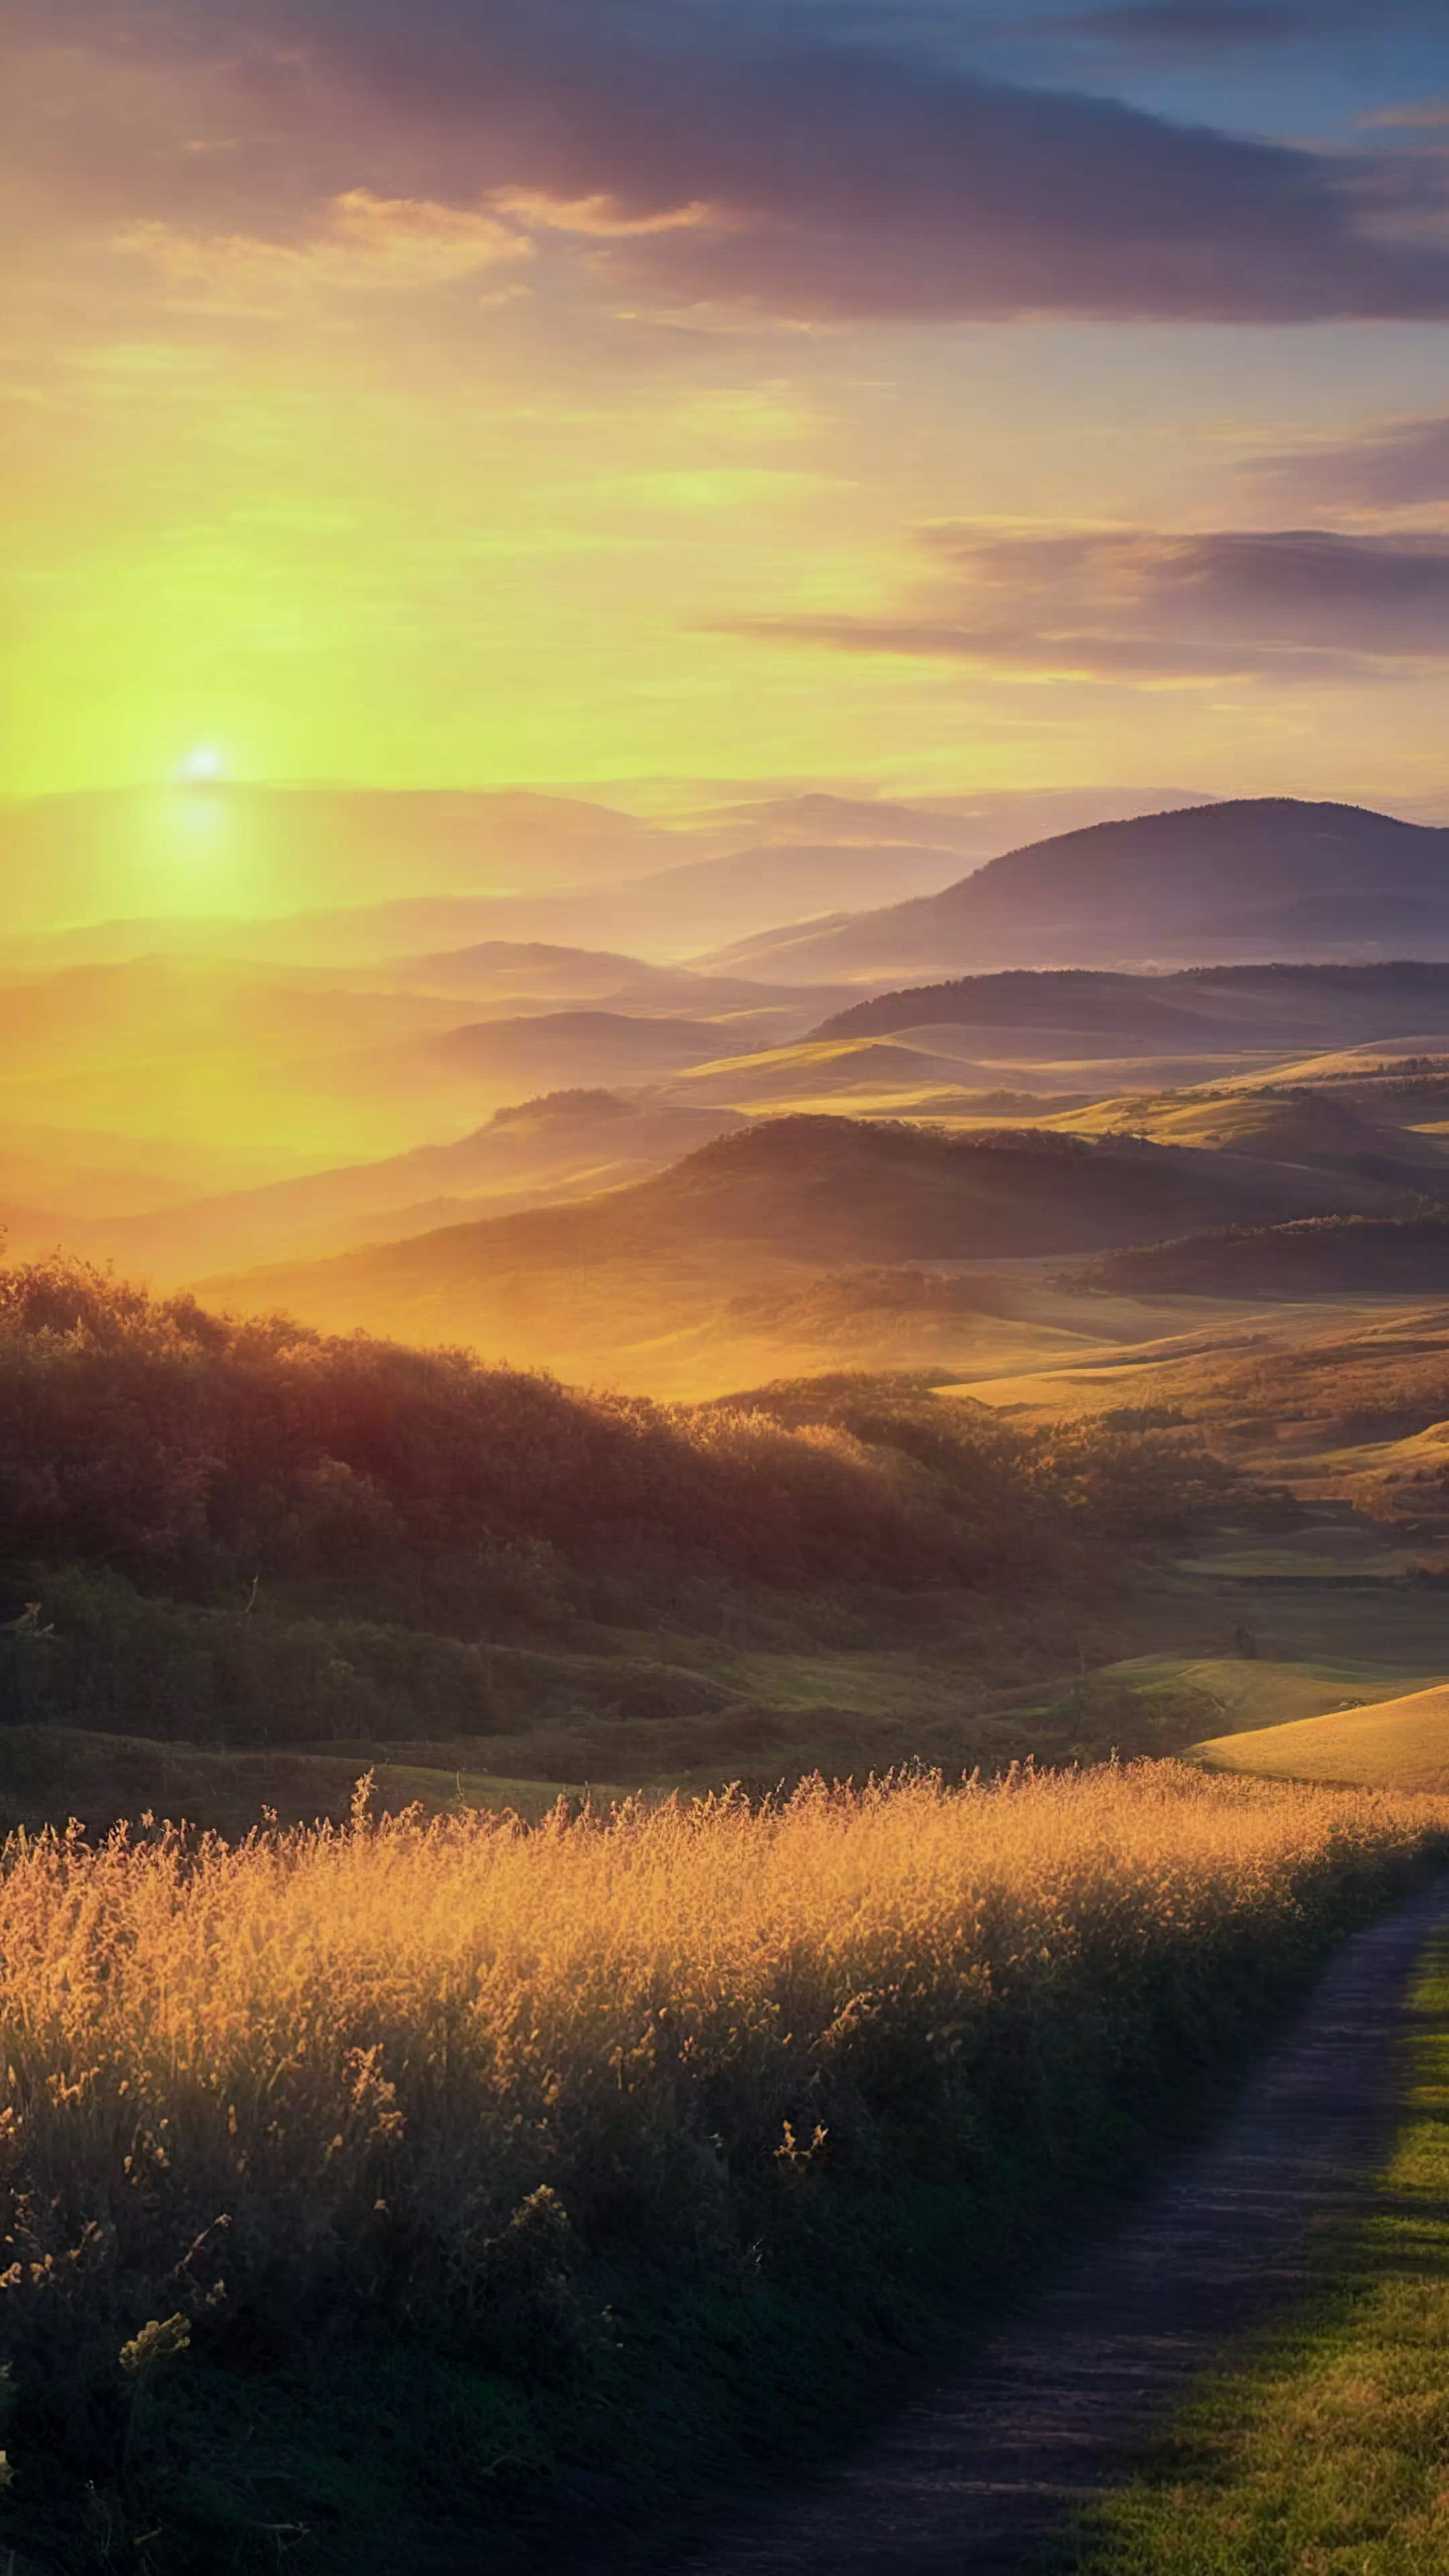 Transform your device’s screen with our HD nature wallpaper for mobile, capturing a sunrise over a countryside with rolling hills bathed in a golden glow, and let your device become a portal to a serene morning in the countryside.